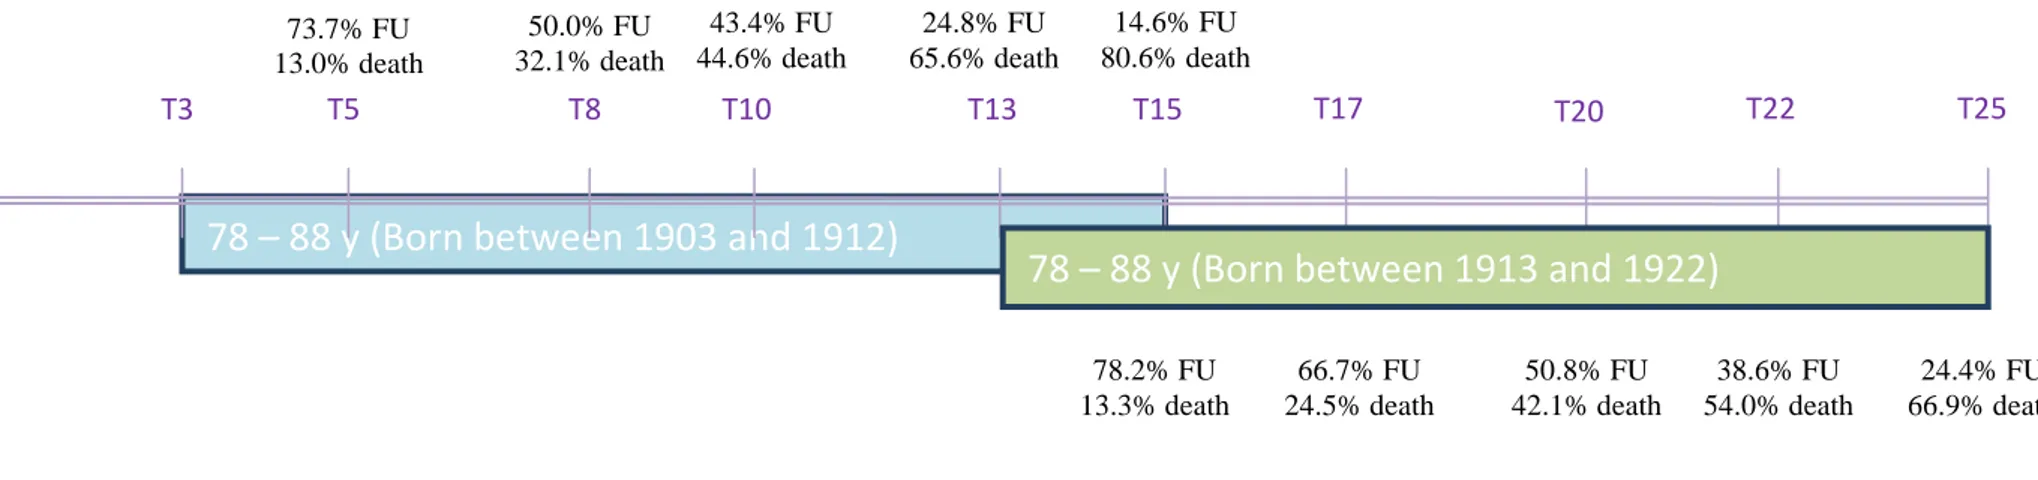 Figure 1: Repartition of subjects in the two generations with percentage of subjects seen (FU) and death (cumulated) at each follow-up time